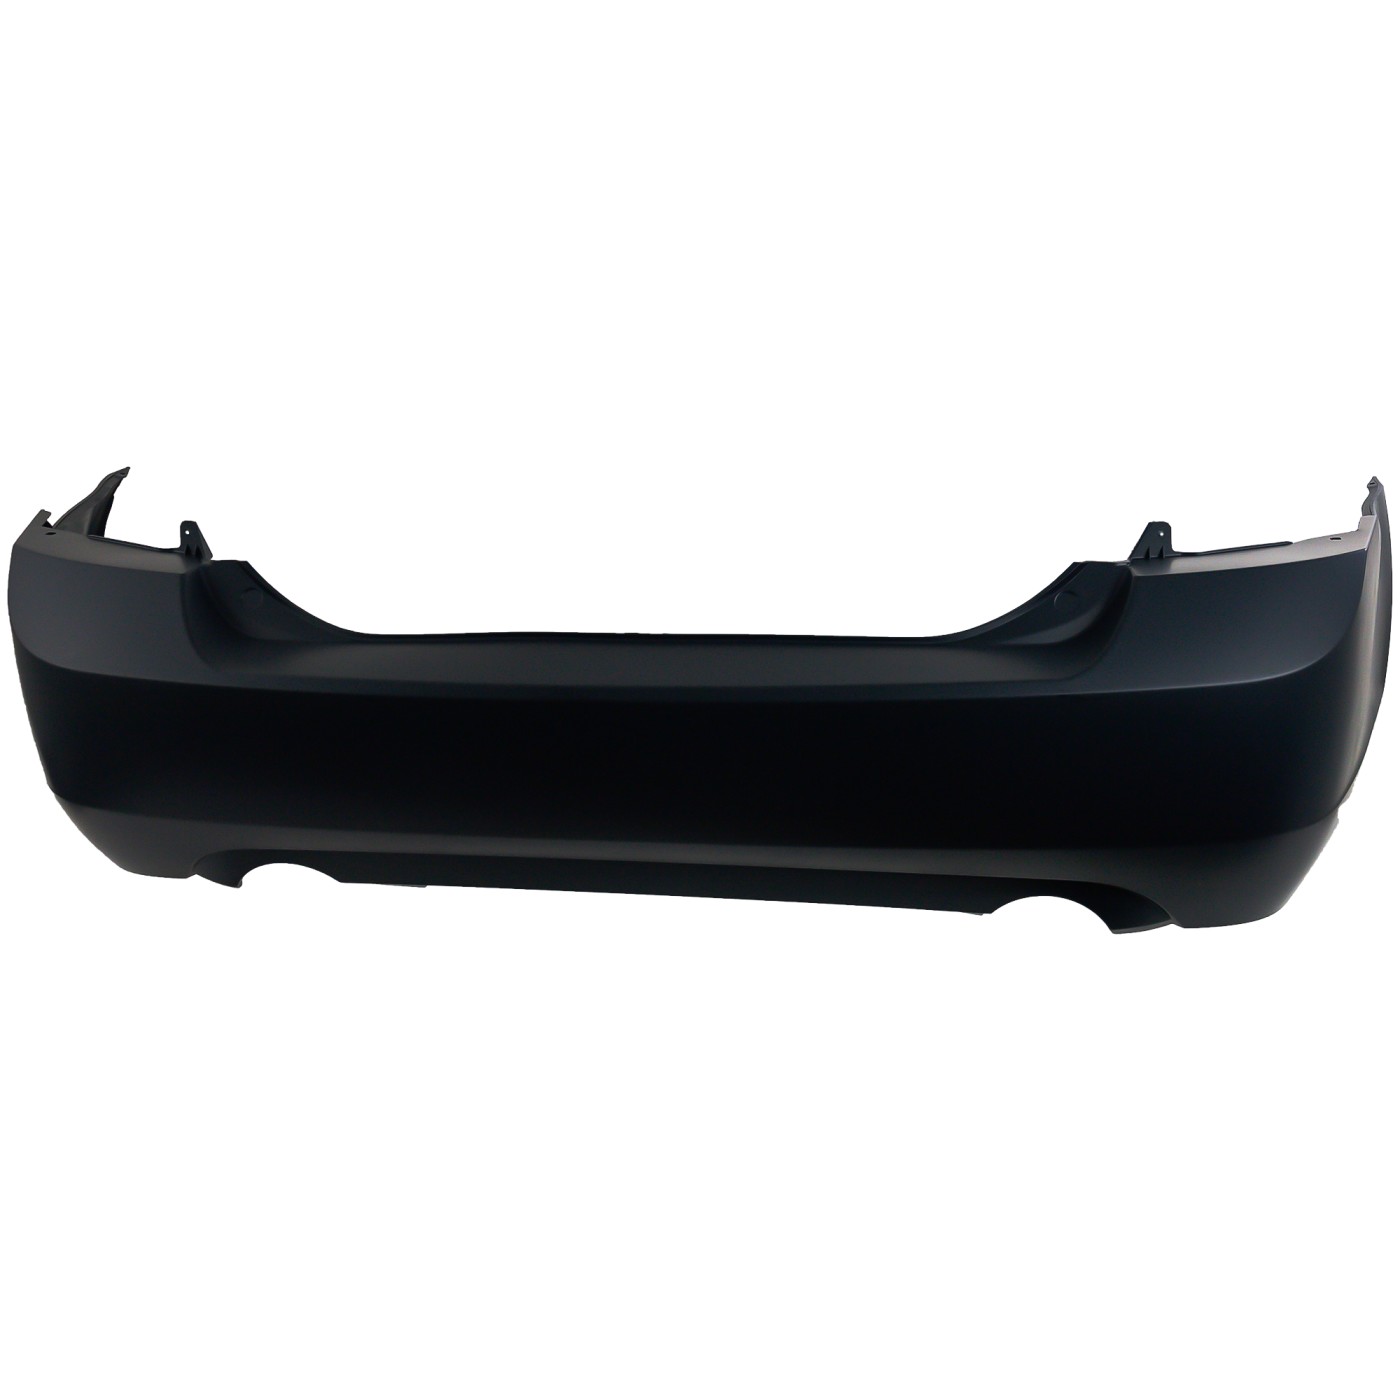 Rear Bumper Cover For 2006-2009 Ford Fusion w/ Dual Exhaust Holes